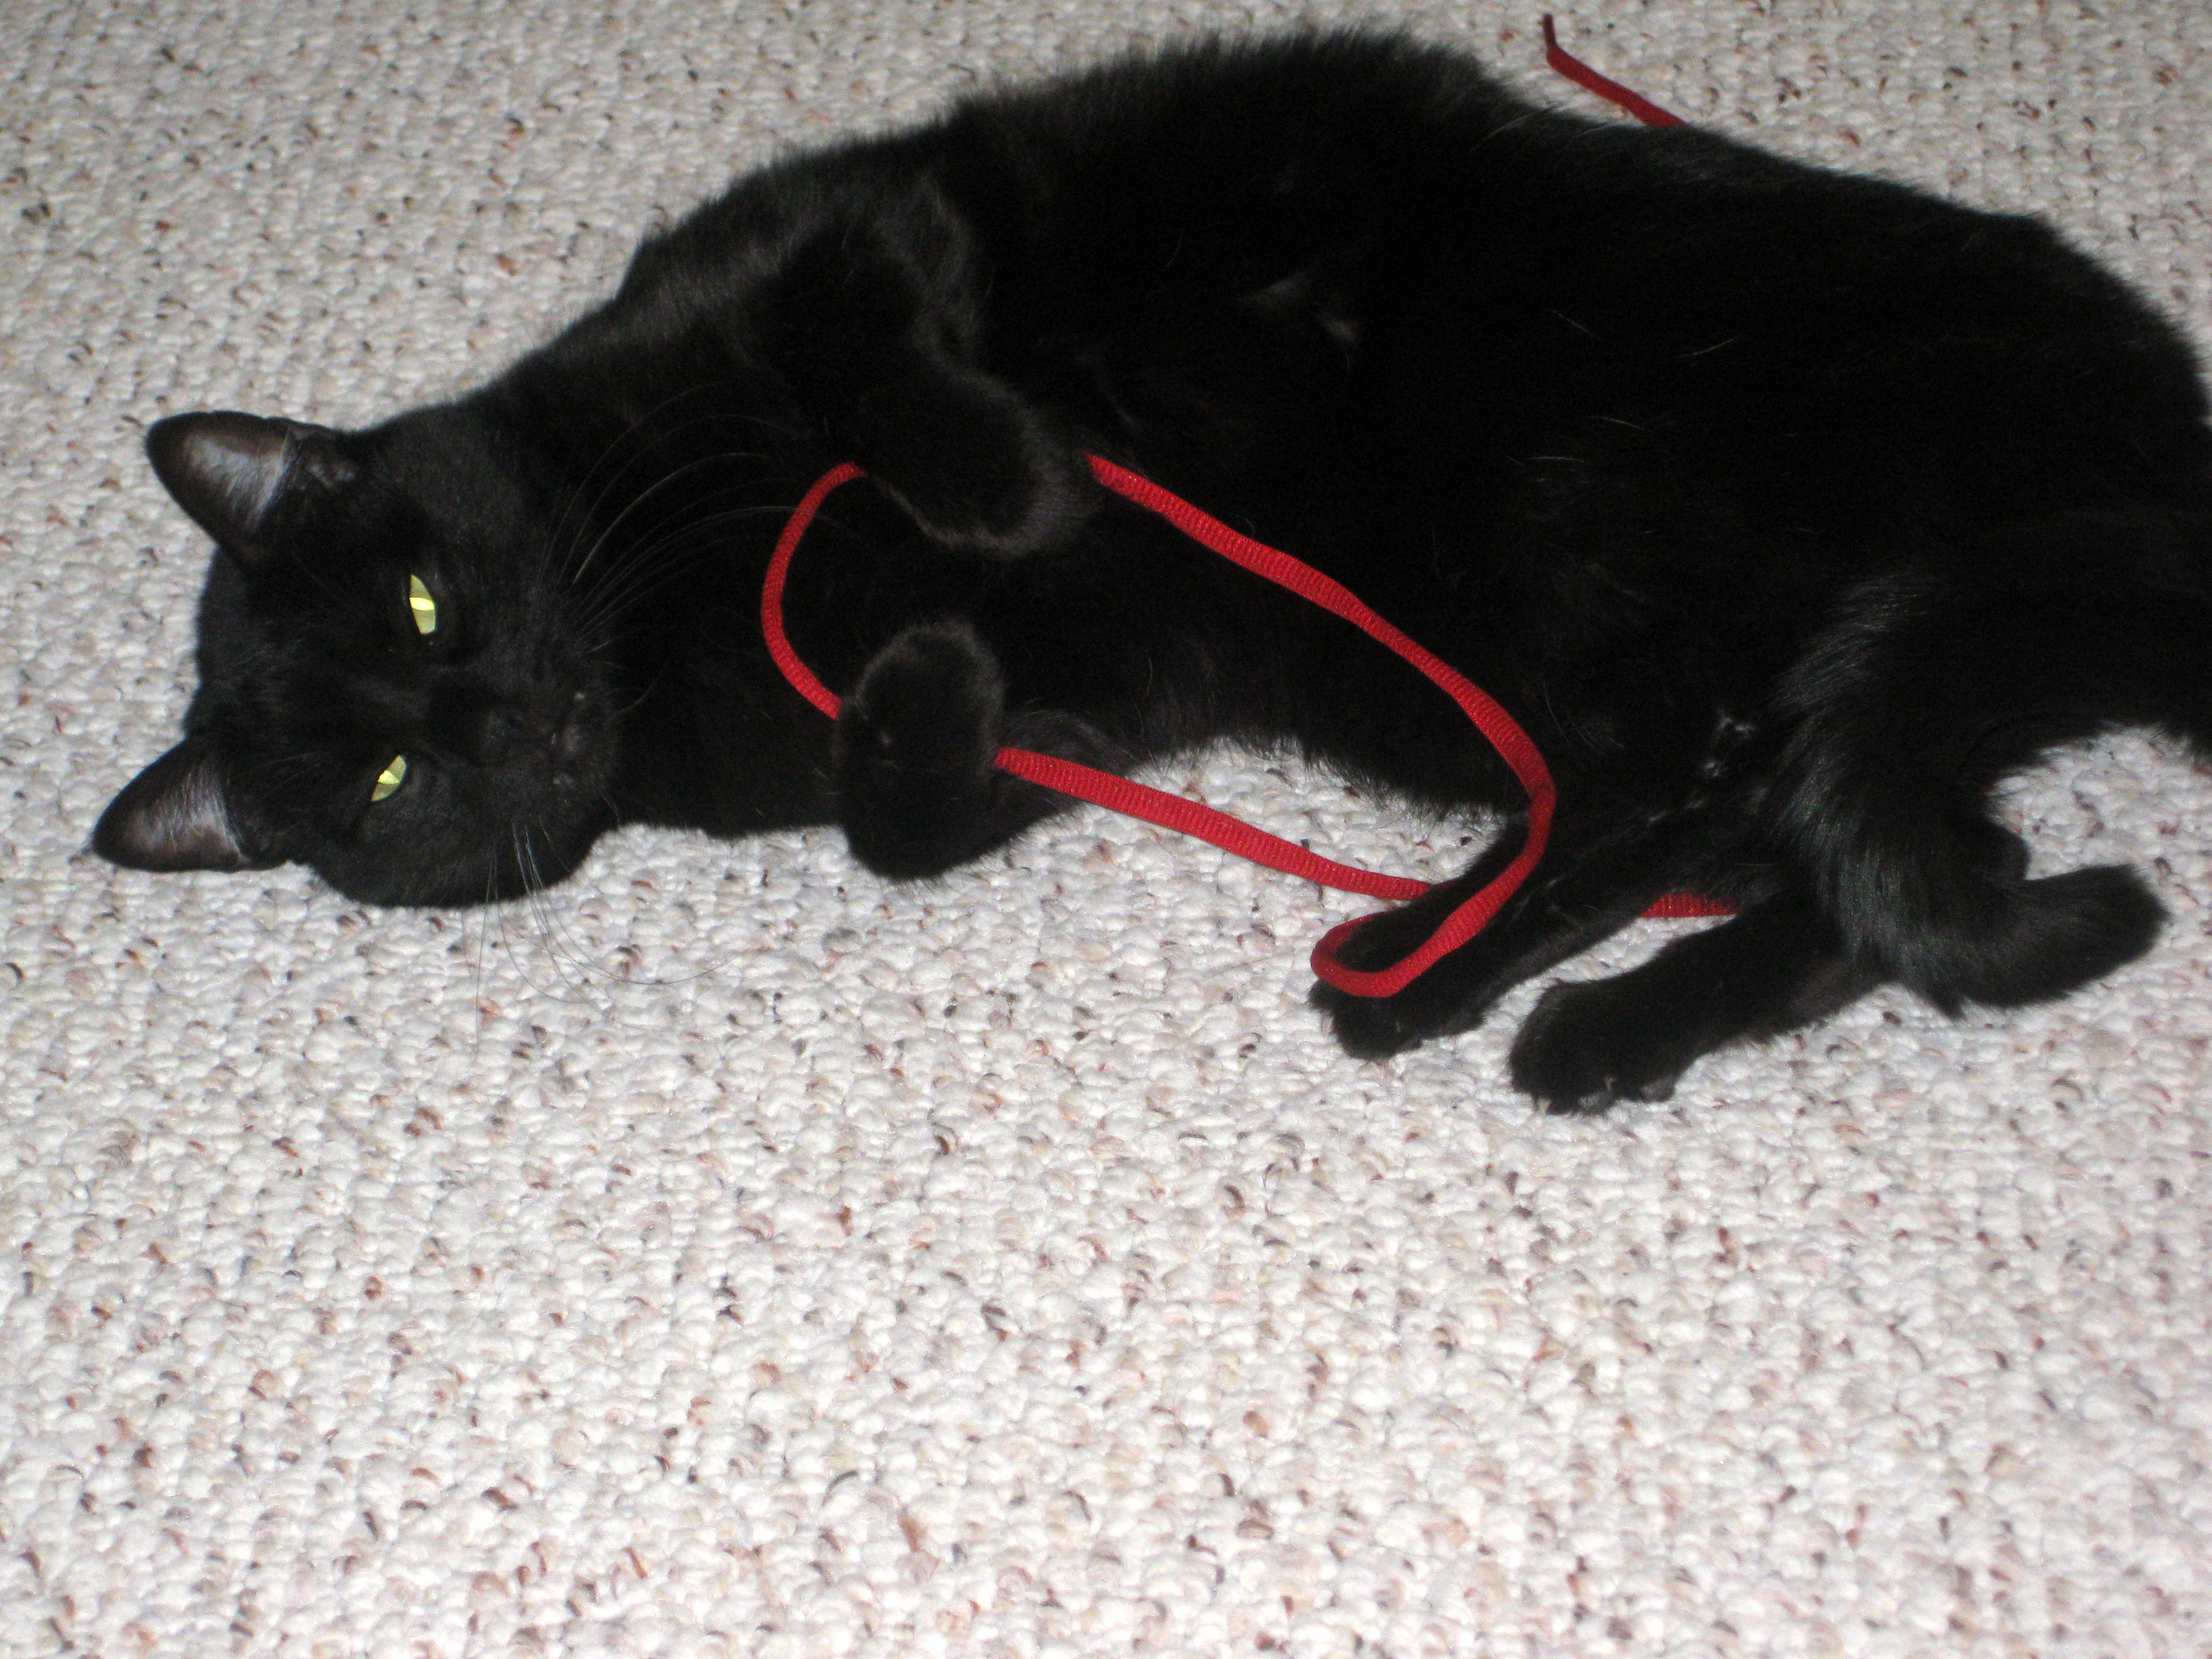 A black cat playing with red yarn